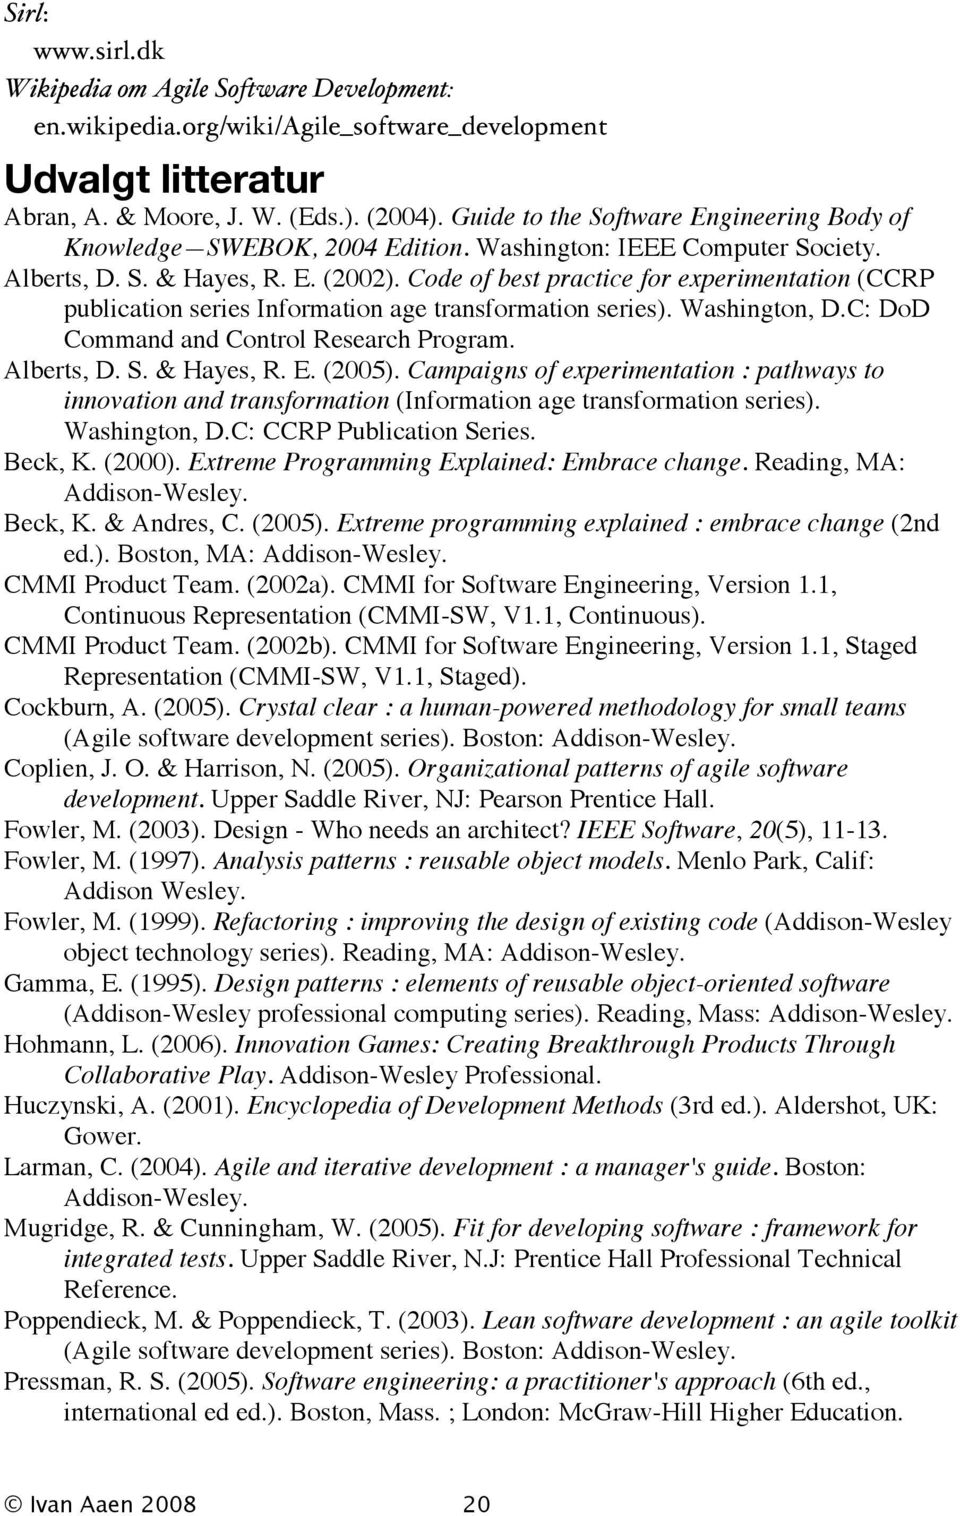 Code of best practice for experimentation (CCRP publication series Information age transformation series). Washington, D.C: DoD Command and Control Research Program. Alberts, D. S. & Hayes, R. E.